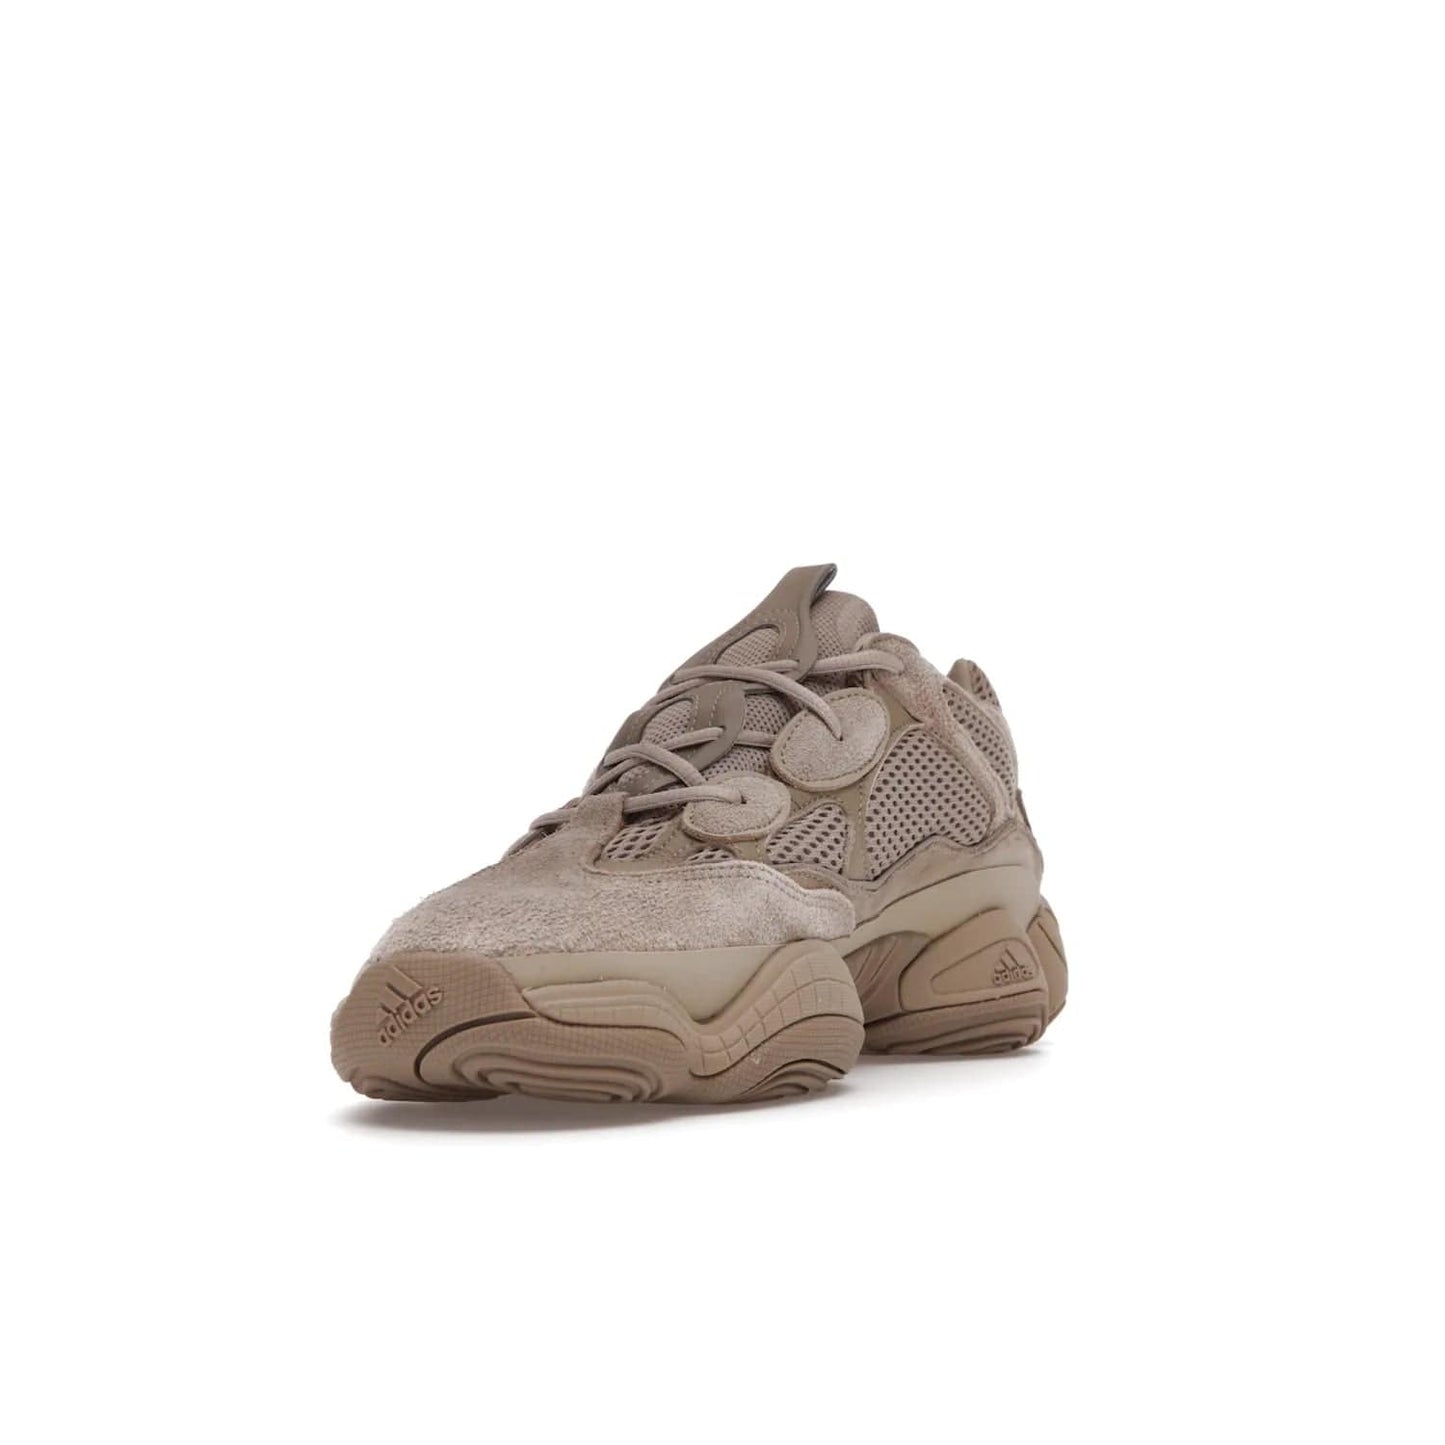 adidas Yeezy 500 Taupe Light - Image 13 - Only at www.BallersClubKickz.com - The adidas Yeezy 500 Taupe Light combines mesh, leather, and suede, with a durable adiPRENE sole for an eye-catching accessory. Reflective piping adds the perfect finishing touches to this unique silhouette. Ideal for any wardrobe, releasing in June 2021.